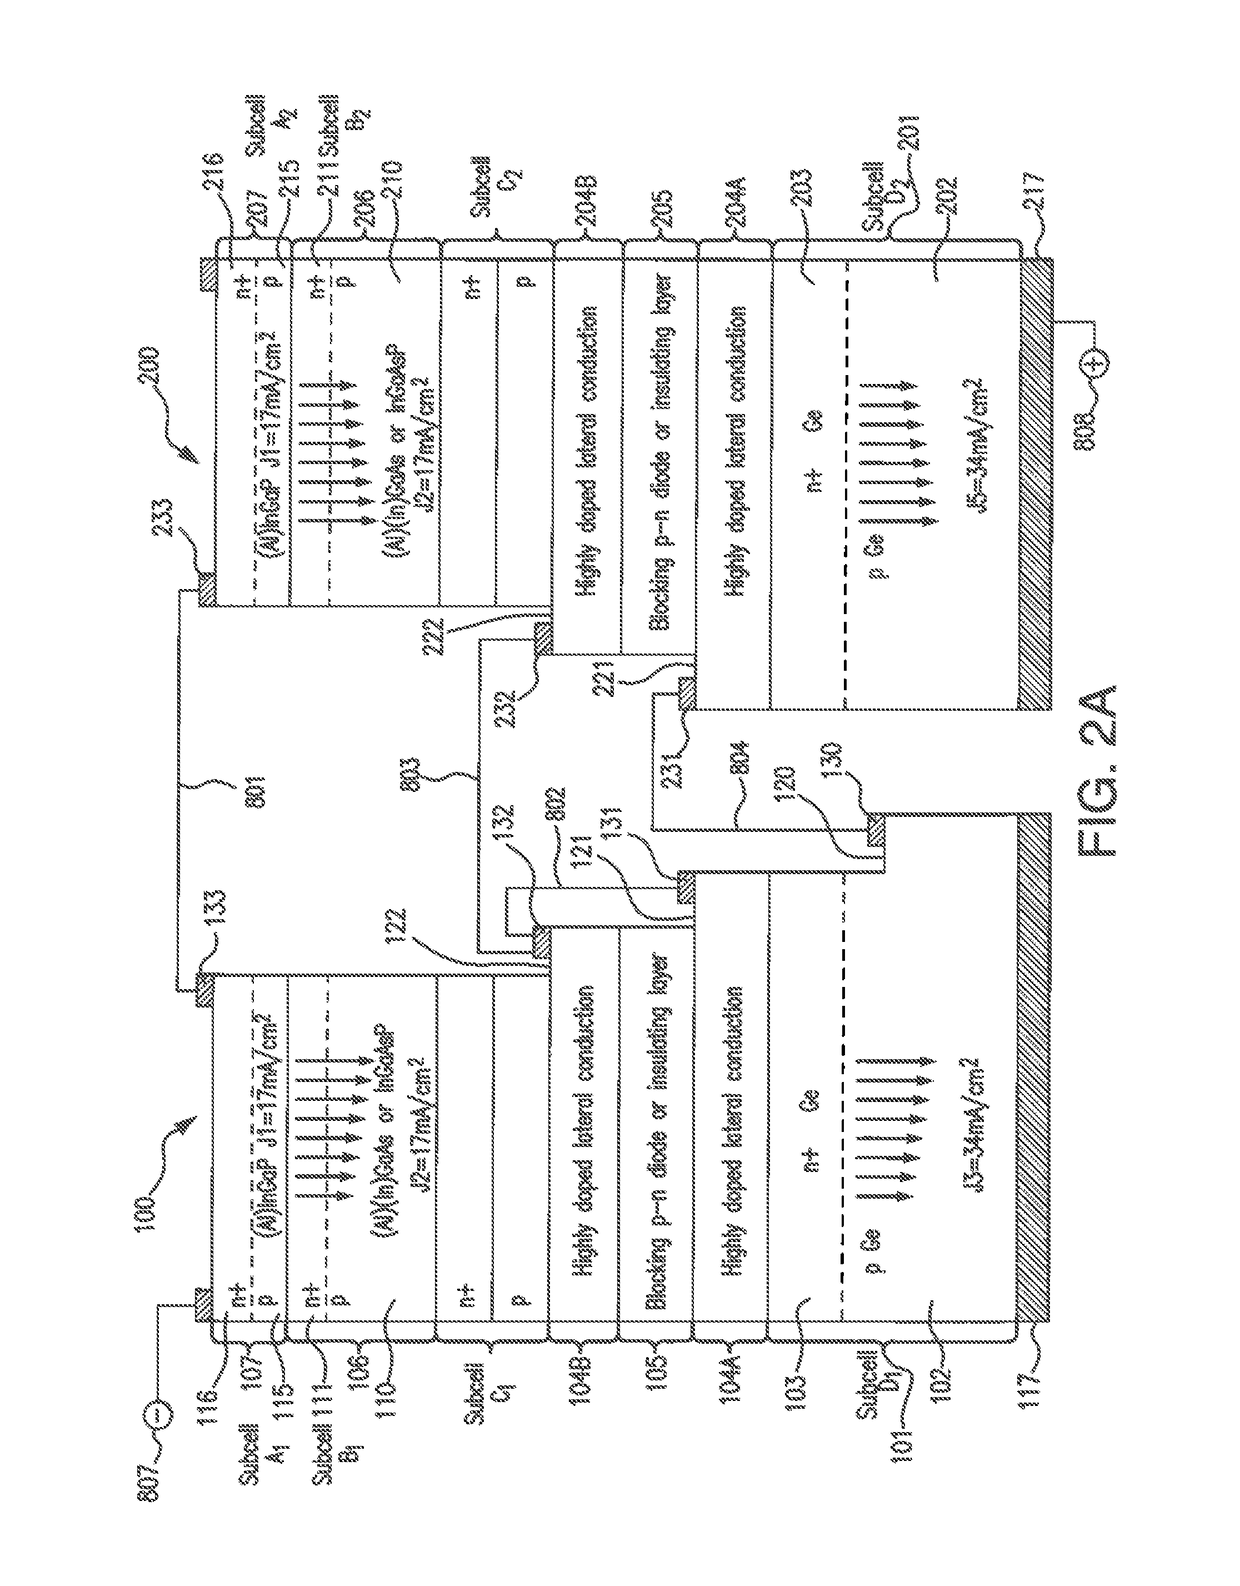 Multijunction solar cell assembly for space applications